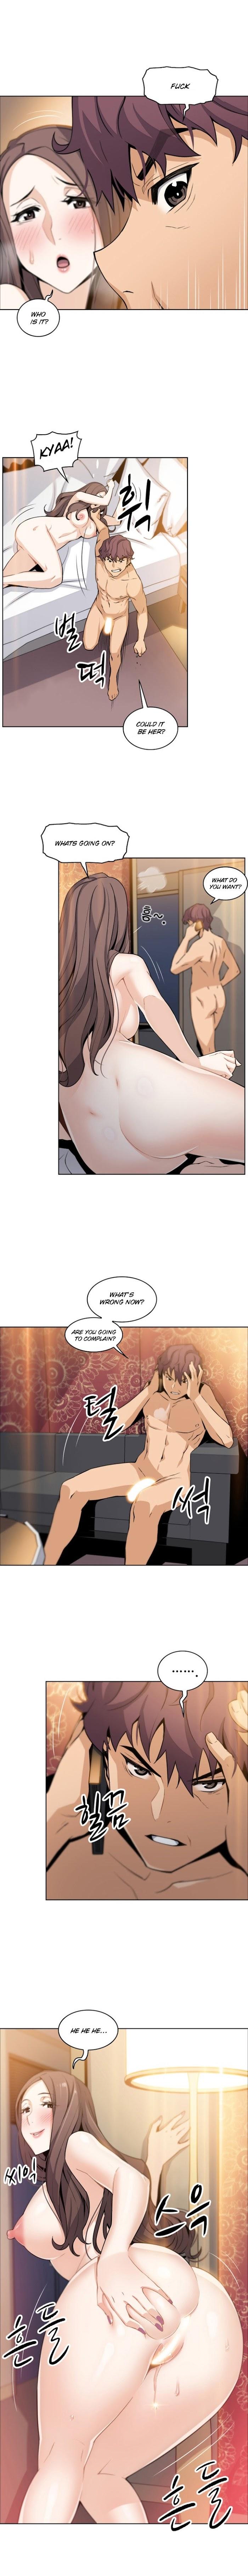 Housekeeper [Neck Pillow, Paper] Ch.49/49 [English] [Manhwa PDF] Completed 103